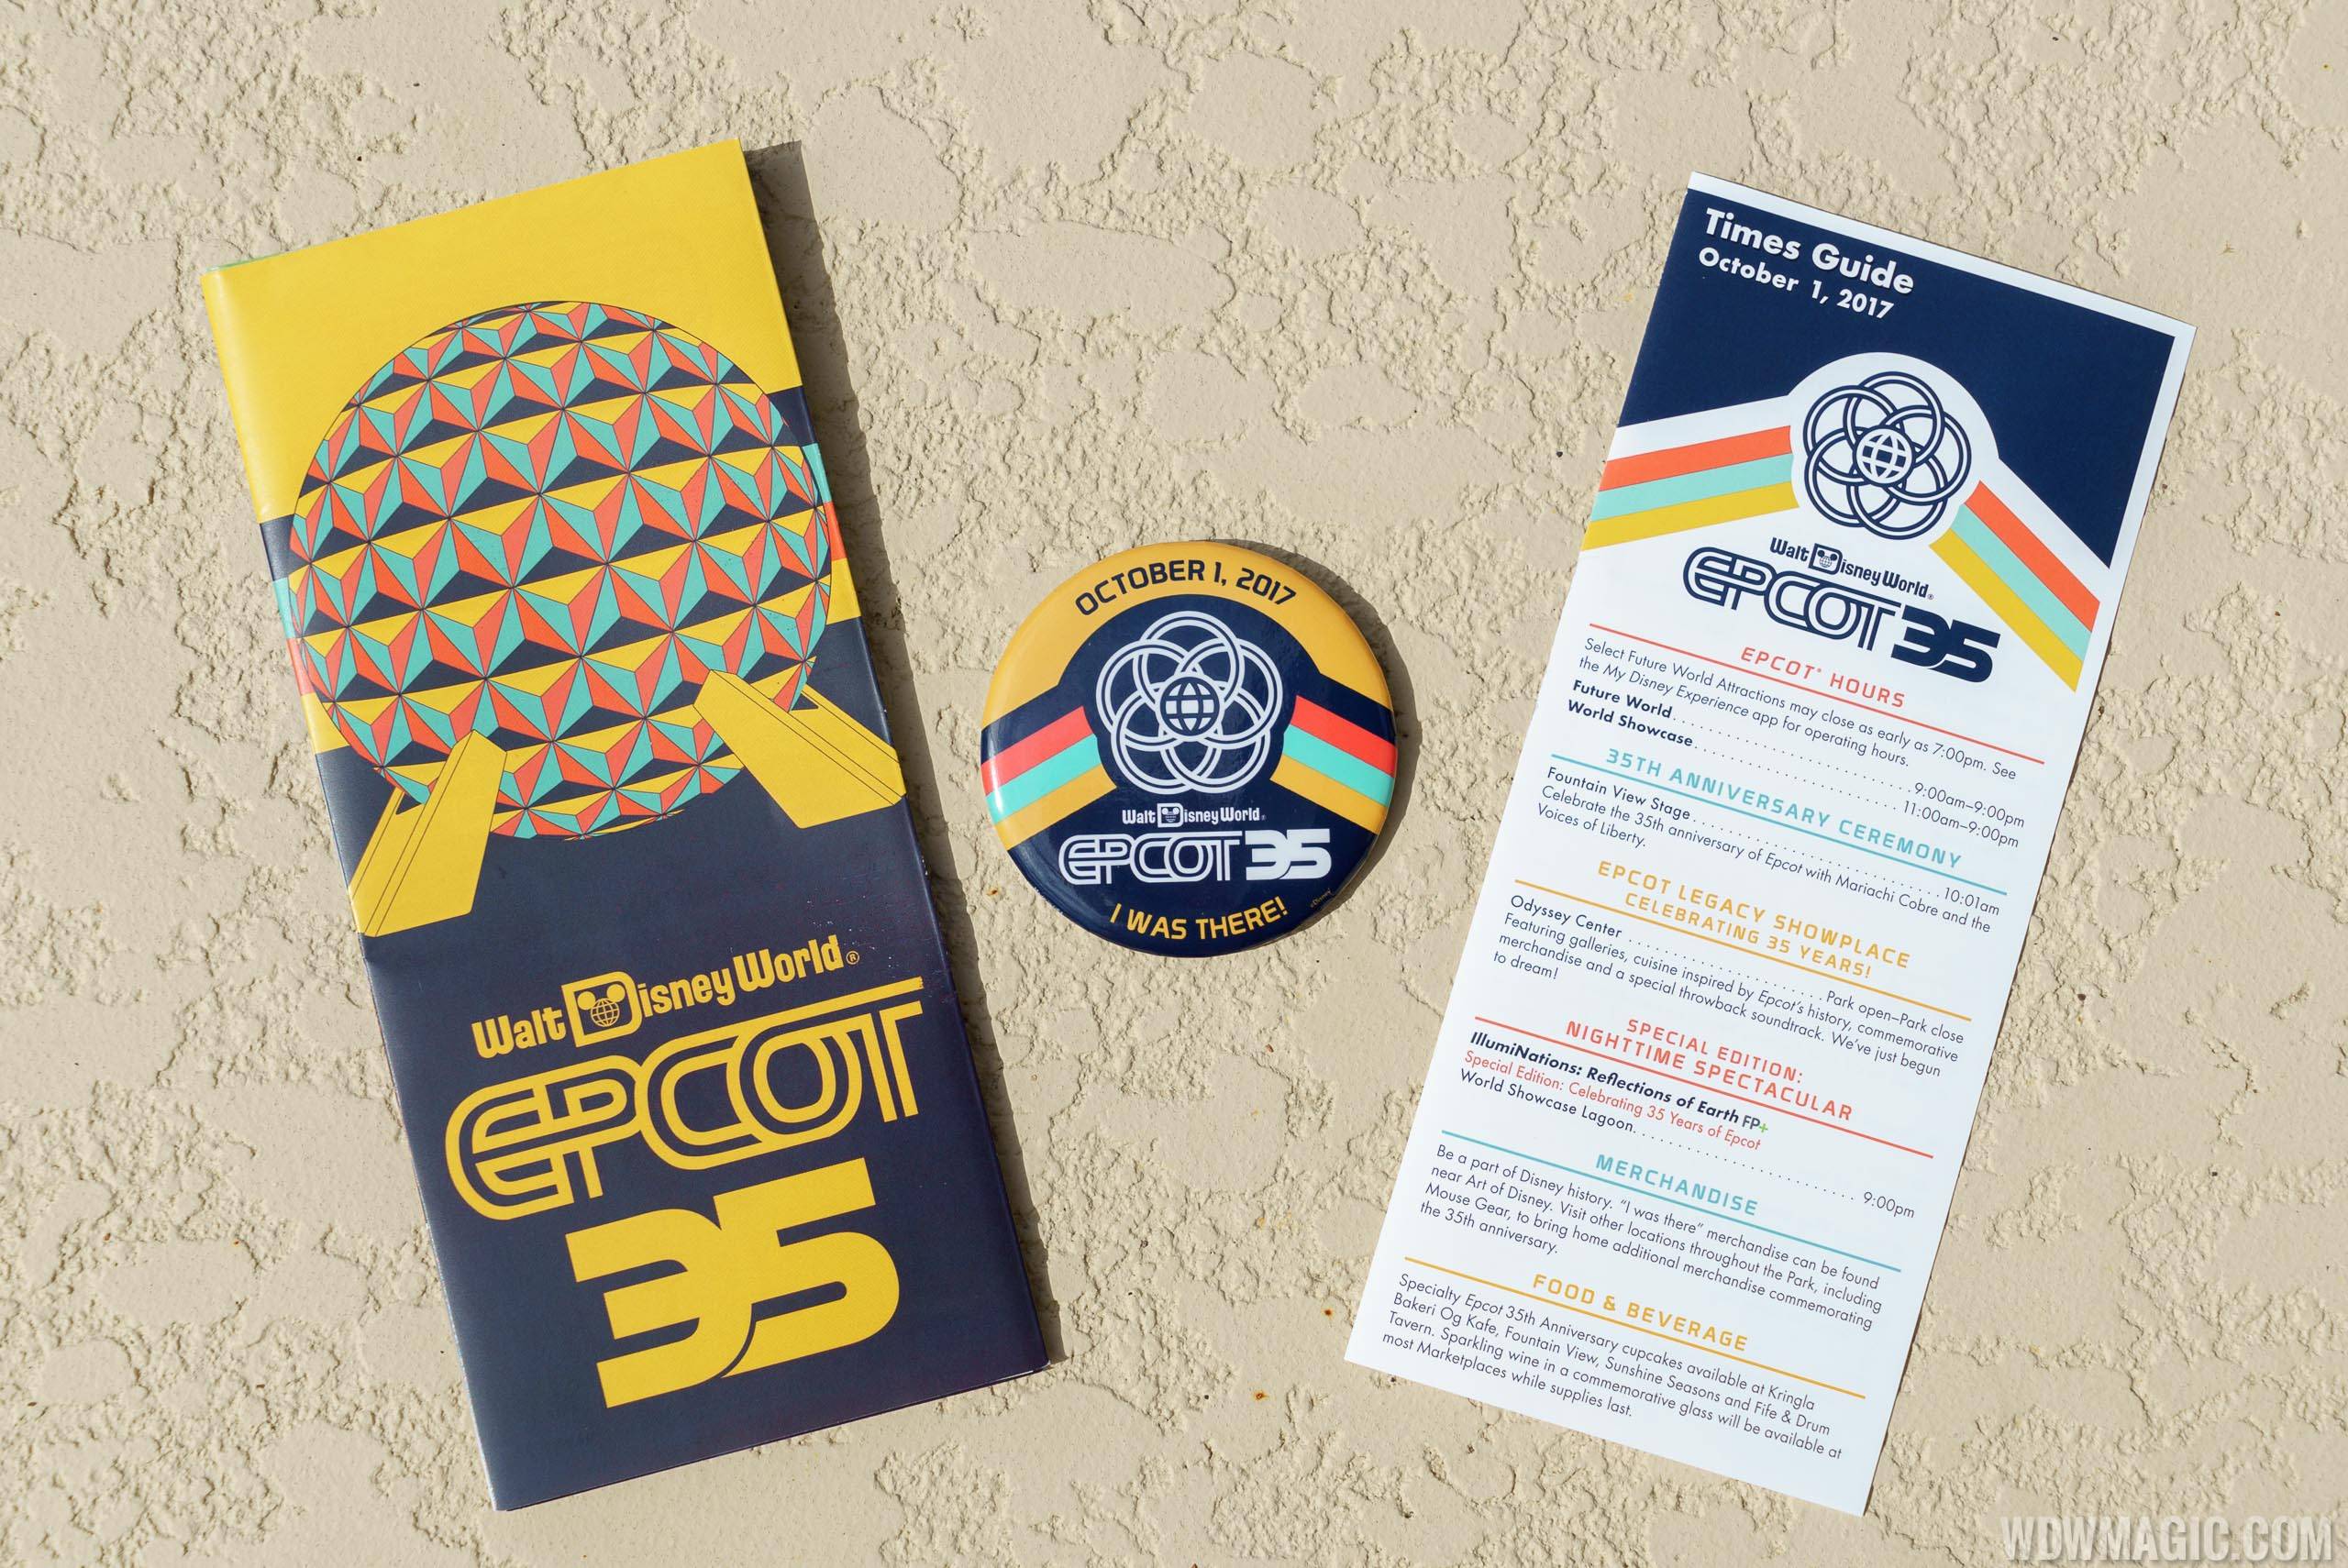 Epcot 35 Guide Map and Button